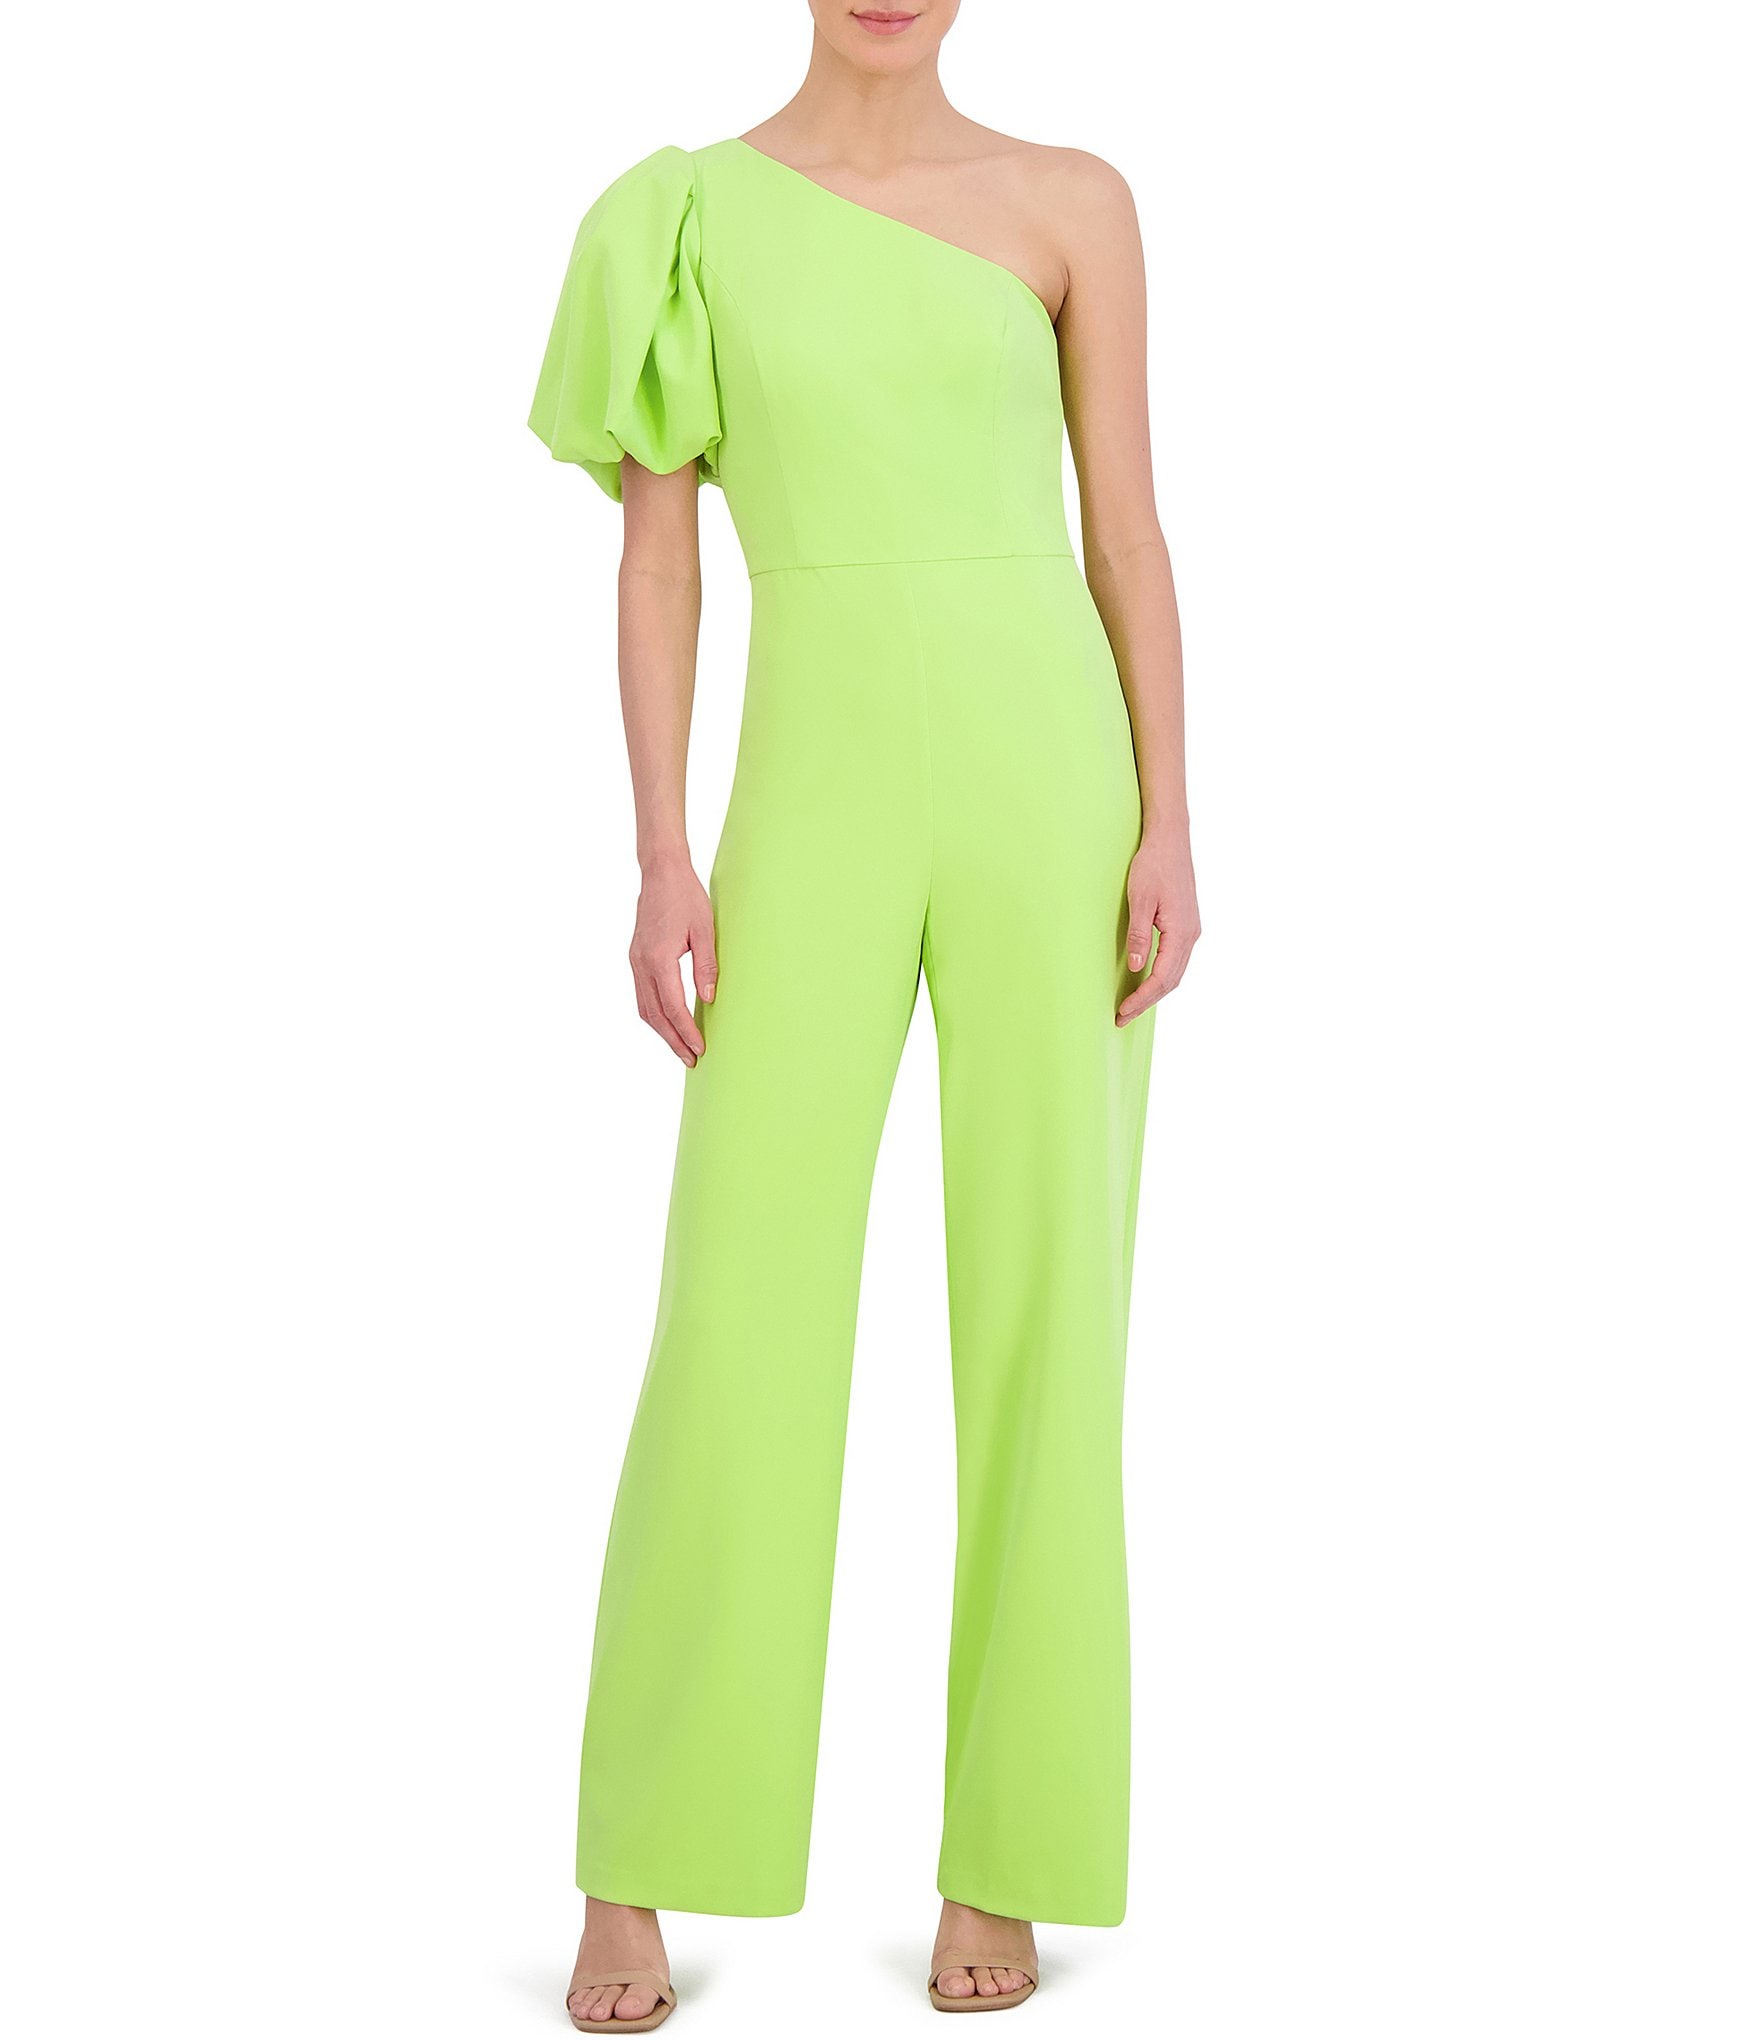 One Shoulder Jumpsuits & Rompers for Women